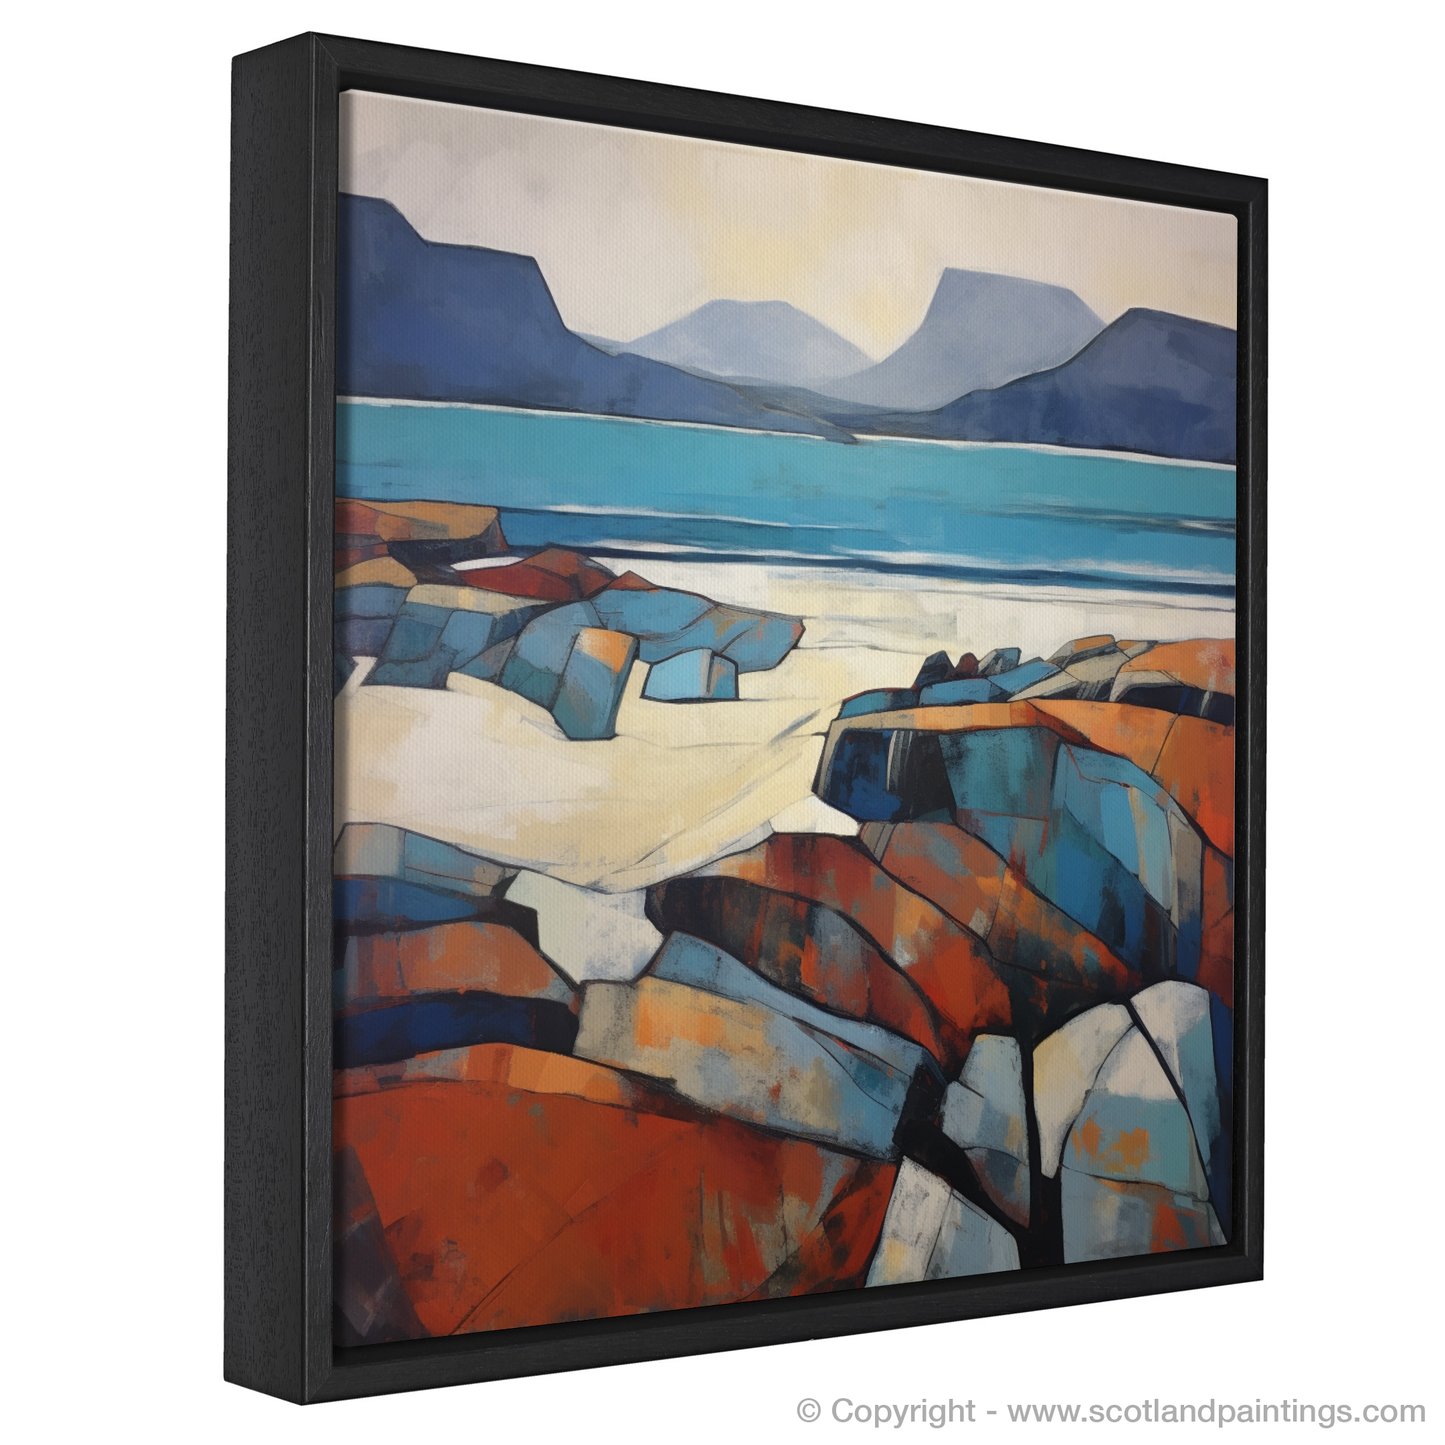 Painting and Art Print of Mellon Udrigle Beach, Wester Ross entitled "Mellon Udrigle Mosaic: An Abstract Ode to Scottish Coves".